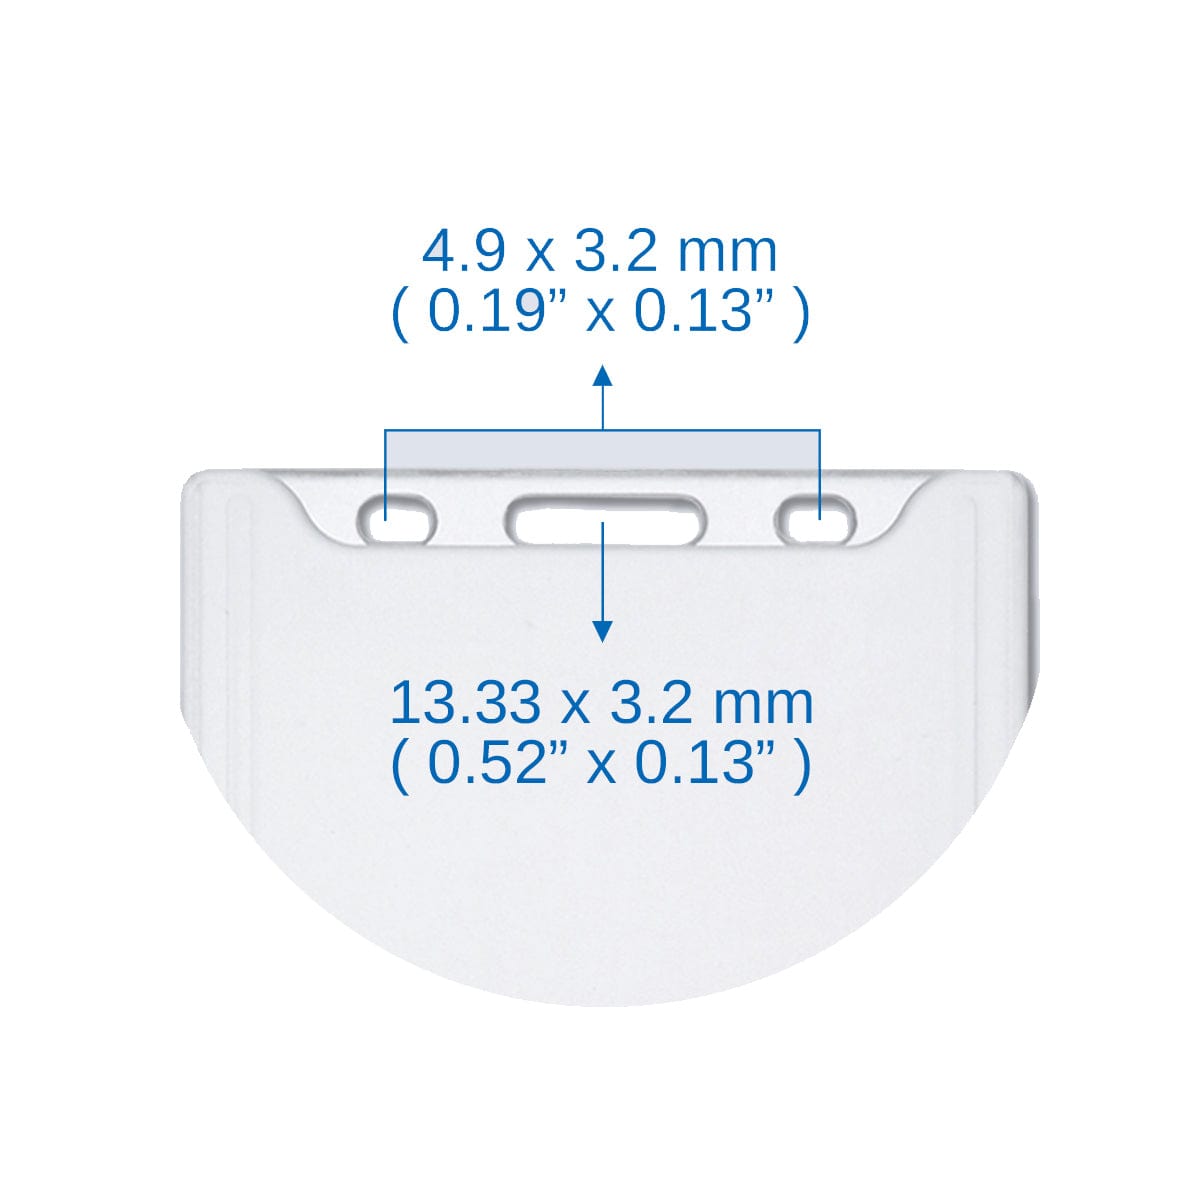 Image showing a white semi-circular object with dimensions labeled, ideal for use with smart card credentials. The top measurement is 4.9 x 3.2 mm (0.19” x 0.13”) and the lower one is 13.33 x 3.2 mm (0.52” x 0.13”). This product is the Top Load Rigid Clear Vertical Badge Holder (AC-915).